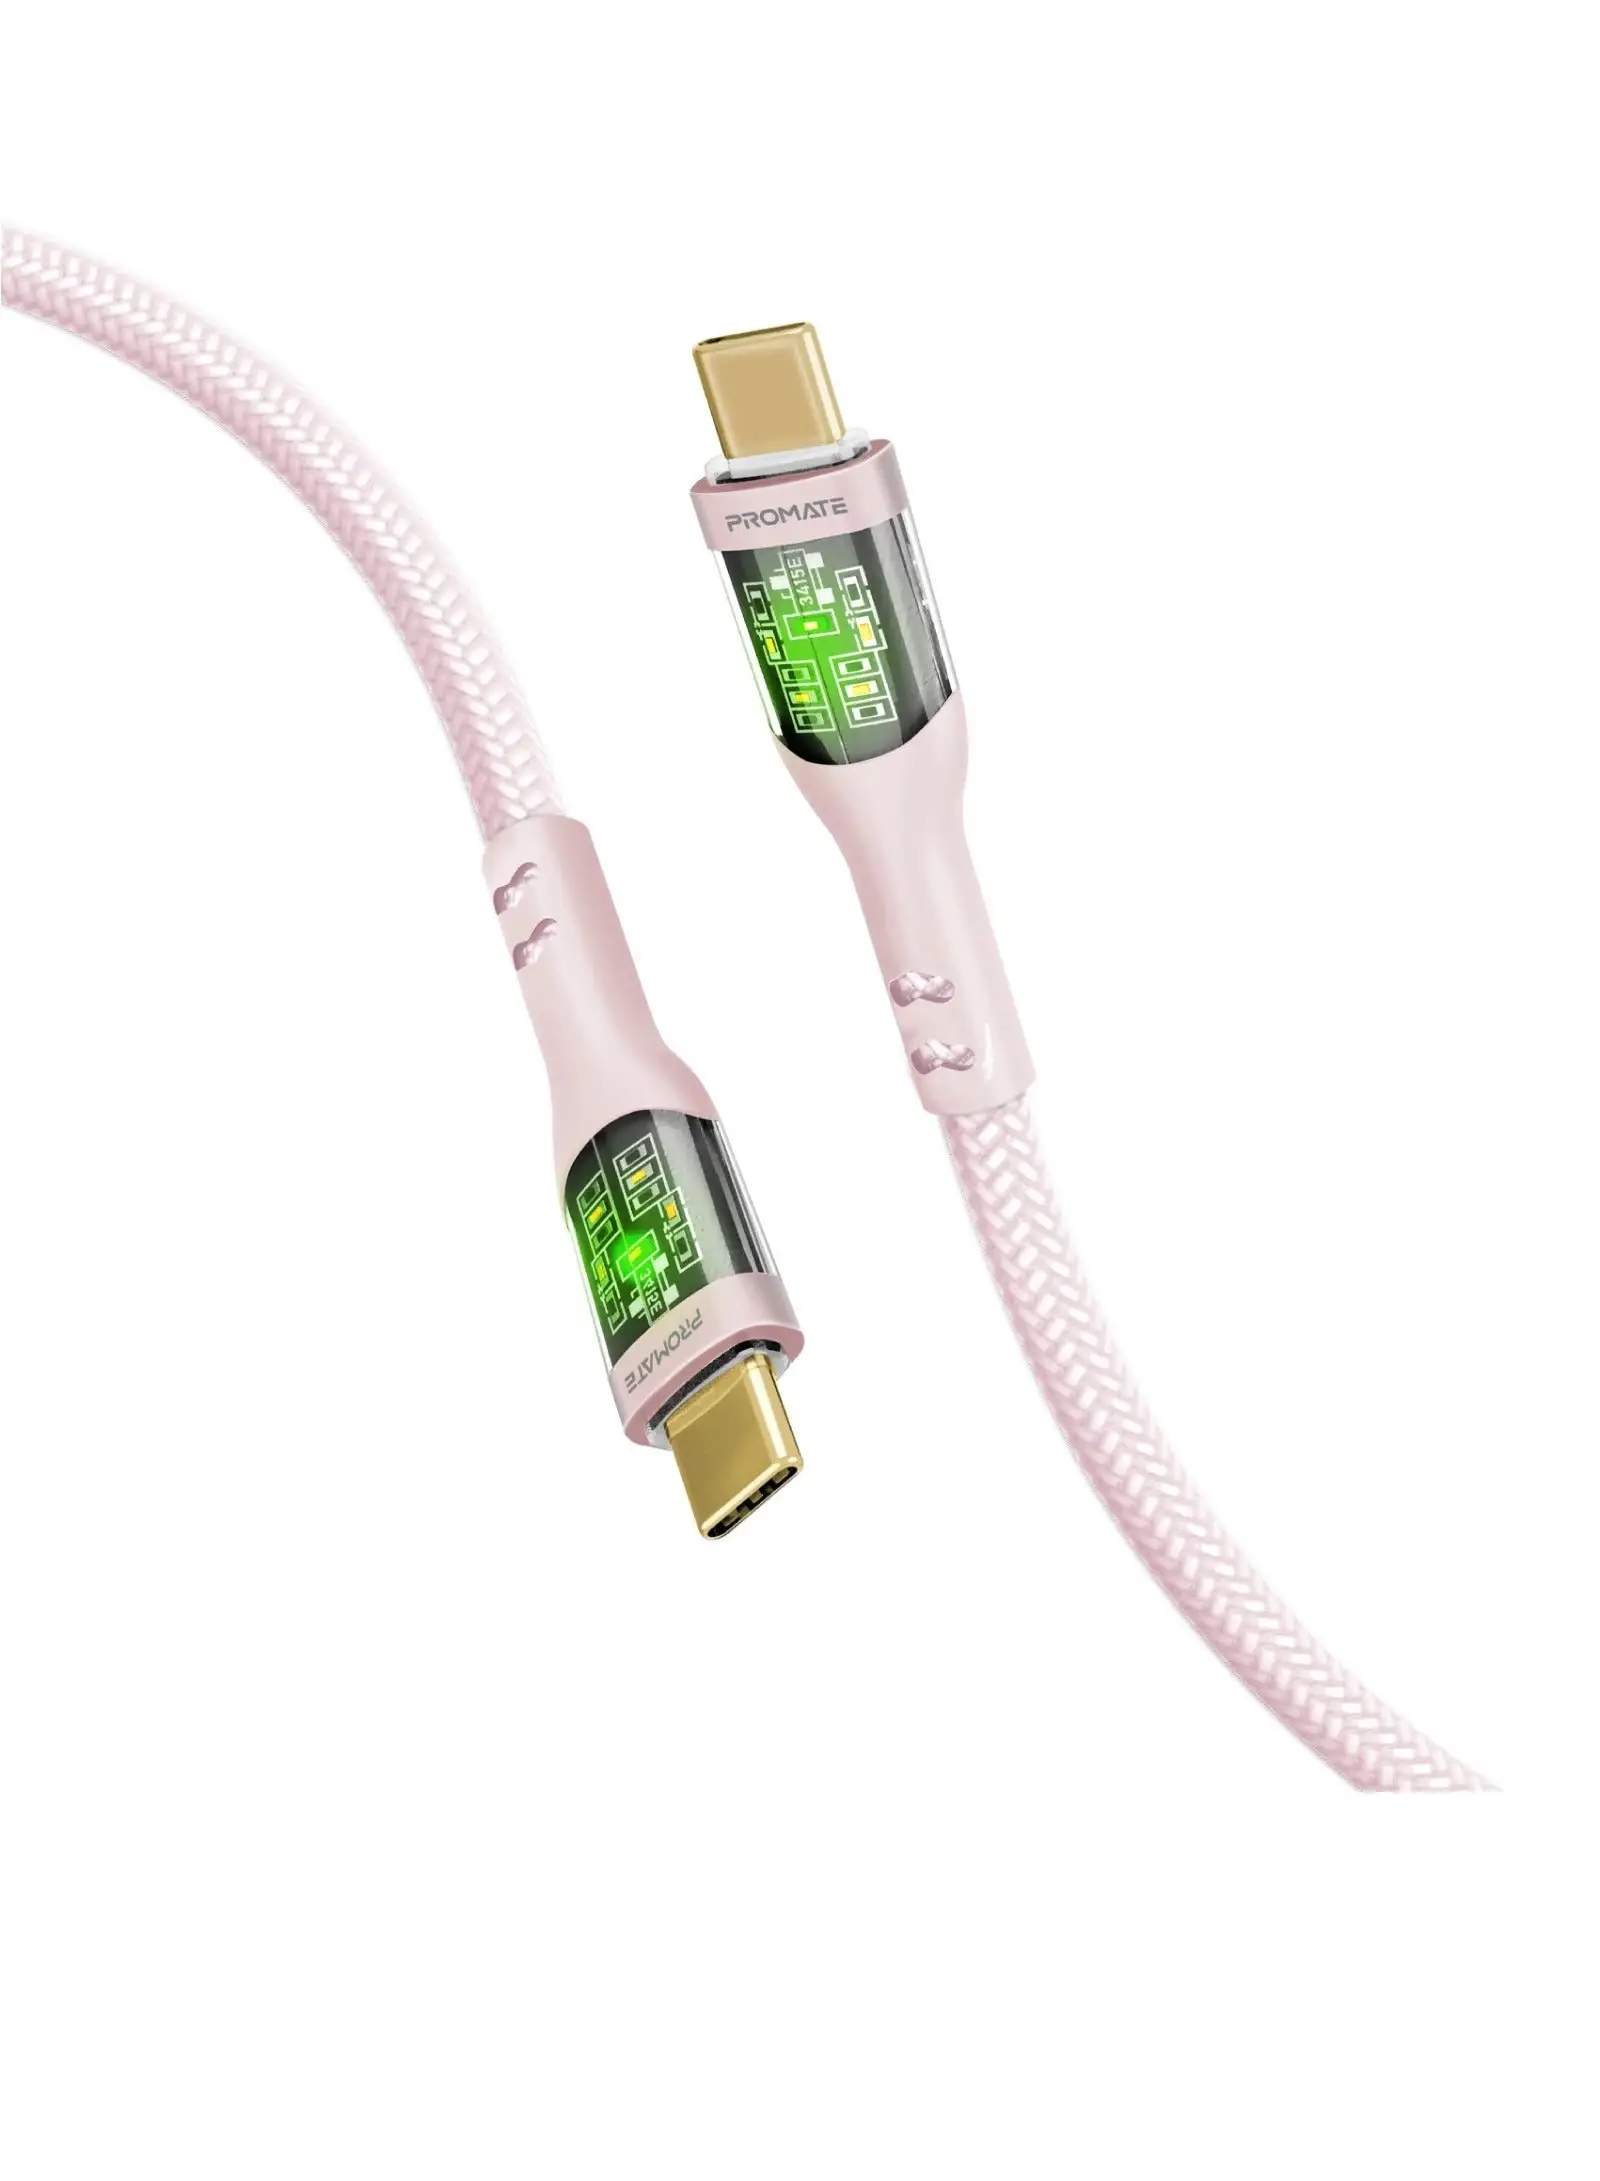 PROMATE USB-C Charging Cable, Stylish Transparent Shelled Type-C Cable with 60W Fast Power Delivery, 480Mbps Data Transfer and Durable 200cm Nylon Braided Cord,  TransLine-CC Pink